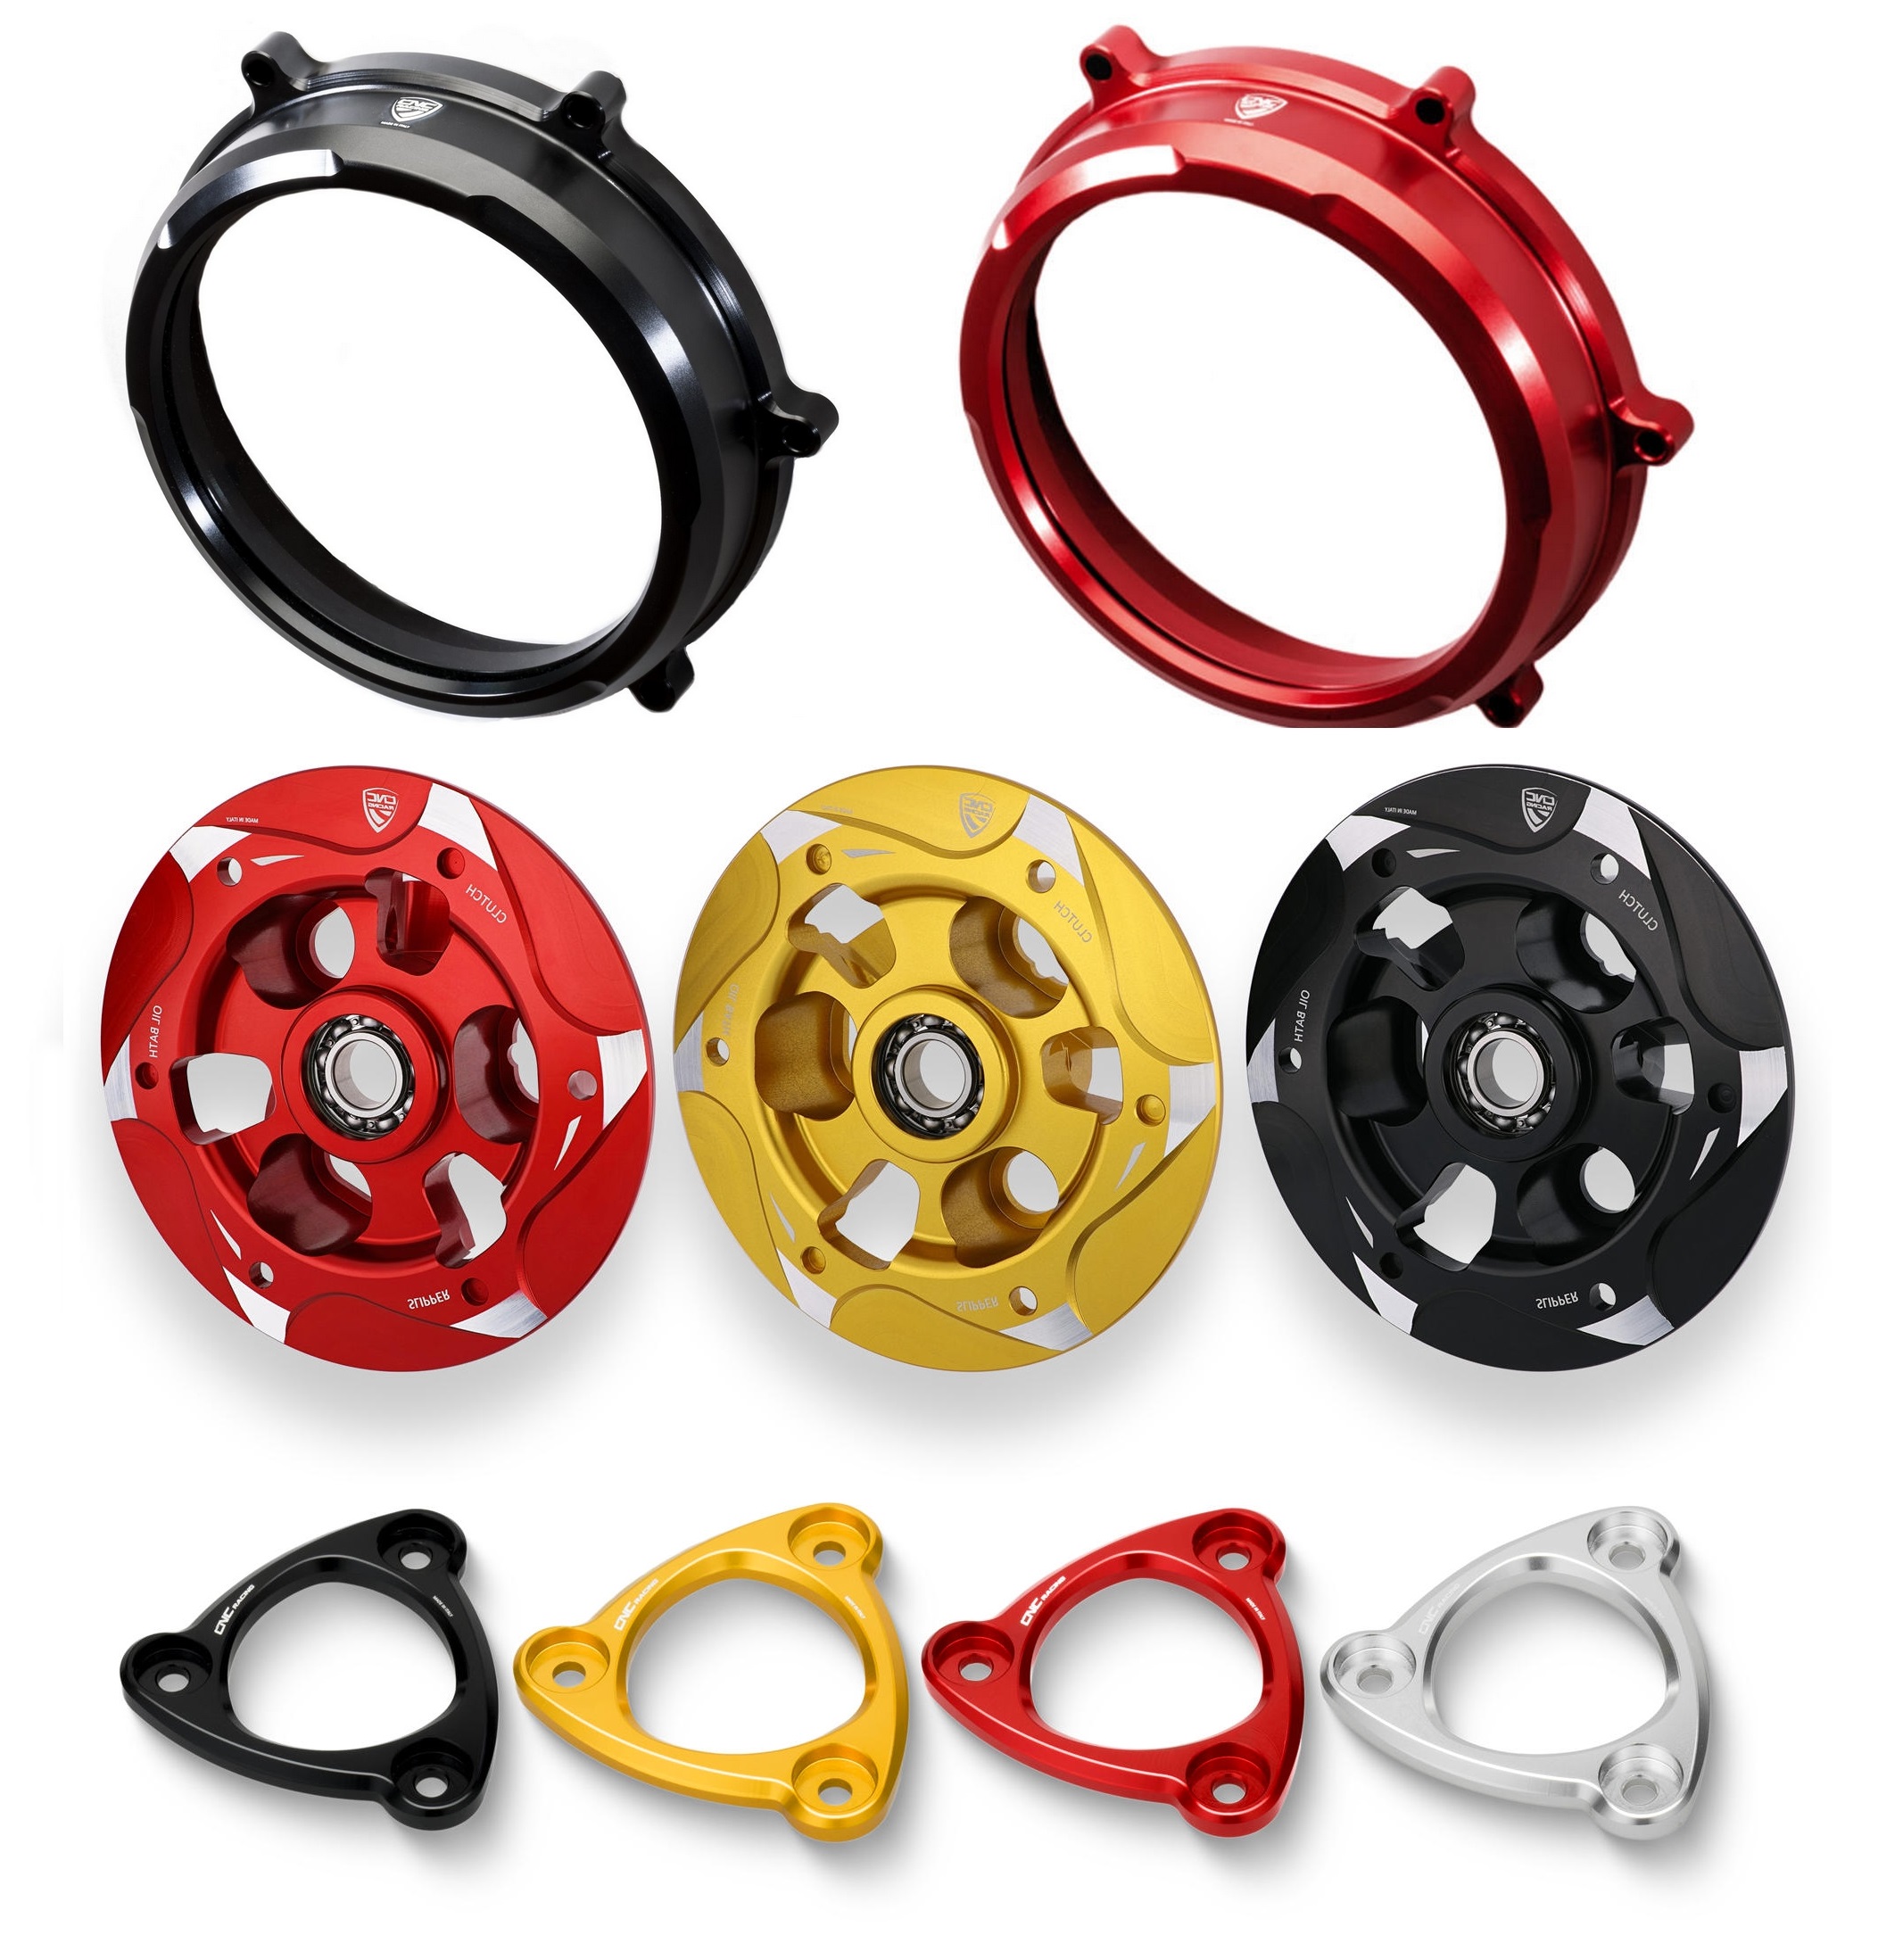 KIT PLEXIGLASS CLUTCH CLEAR COVER CNC RACING FOR DUCATI PANIGALE 1199 - 1299 - 959 - CA200+SP200S+SF200